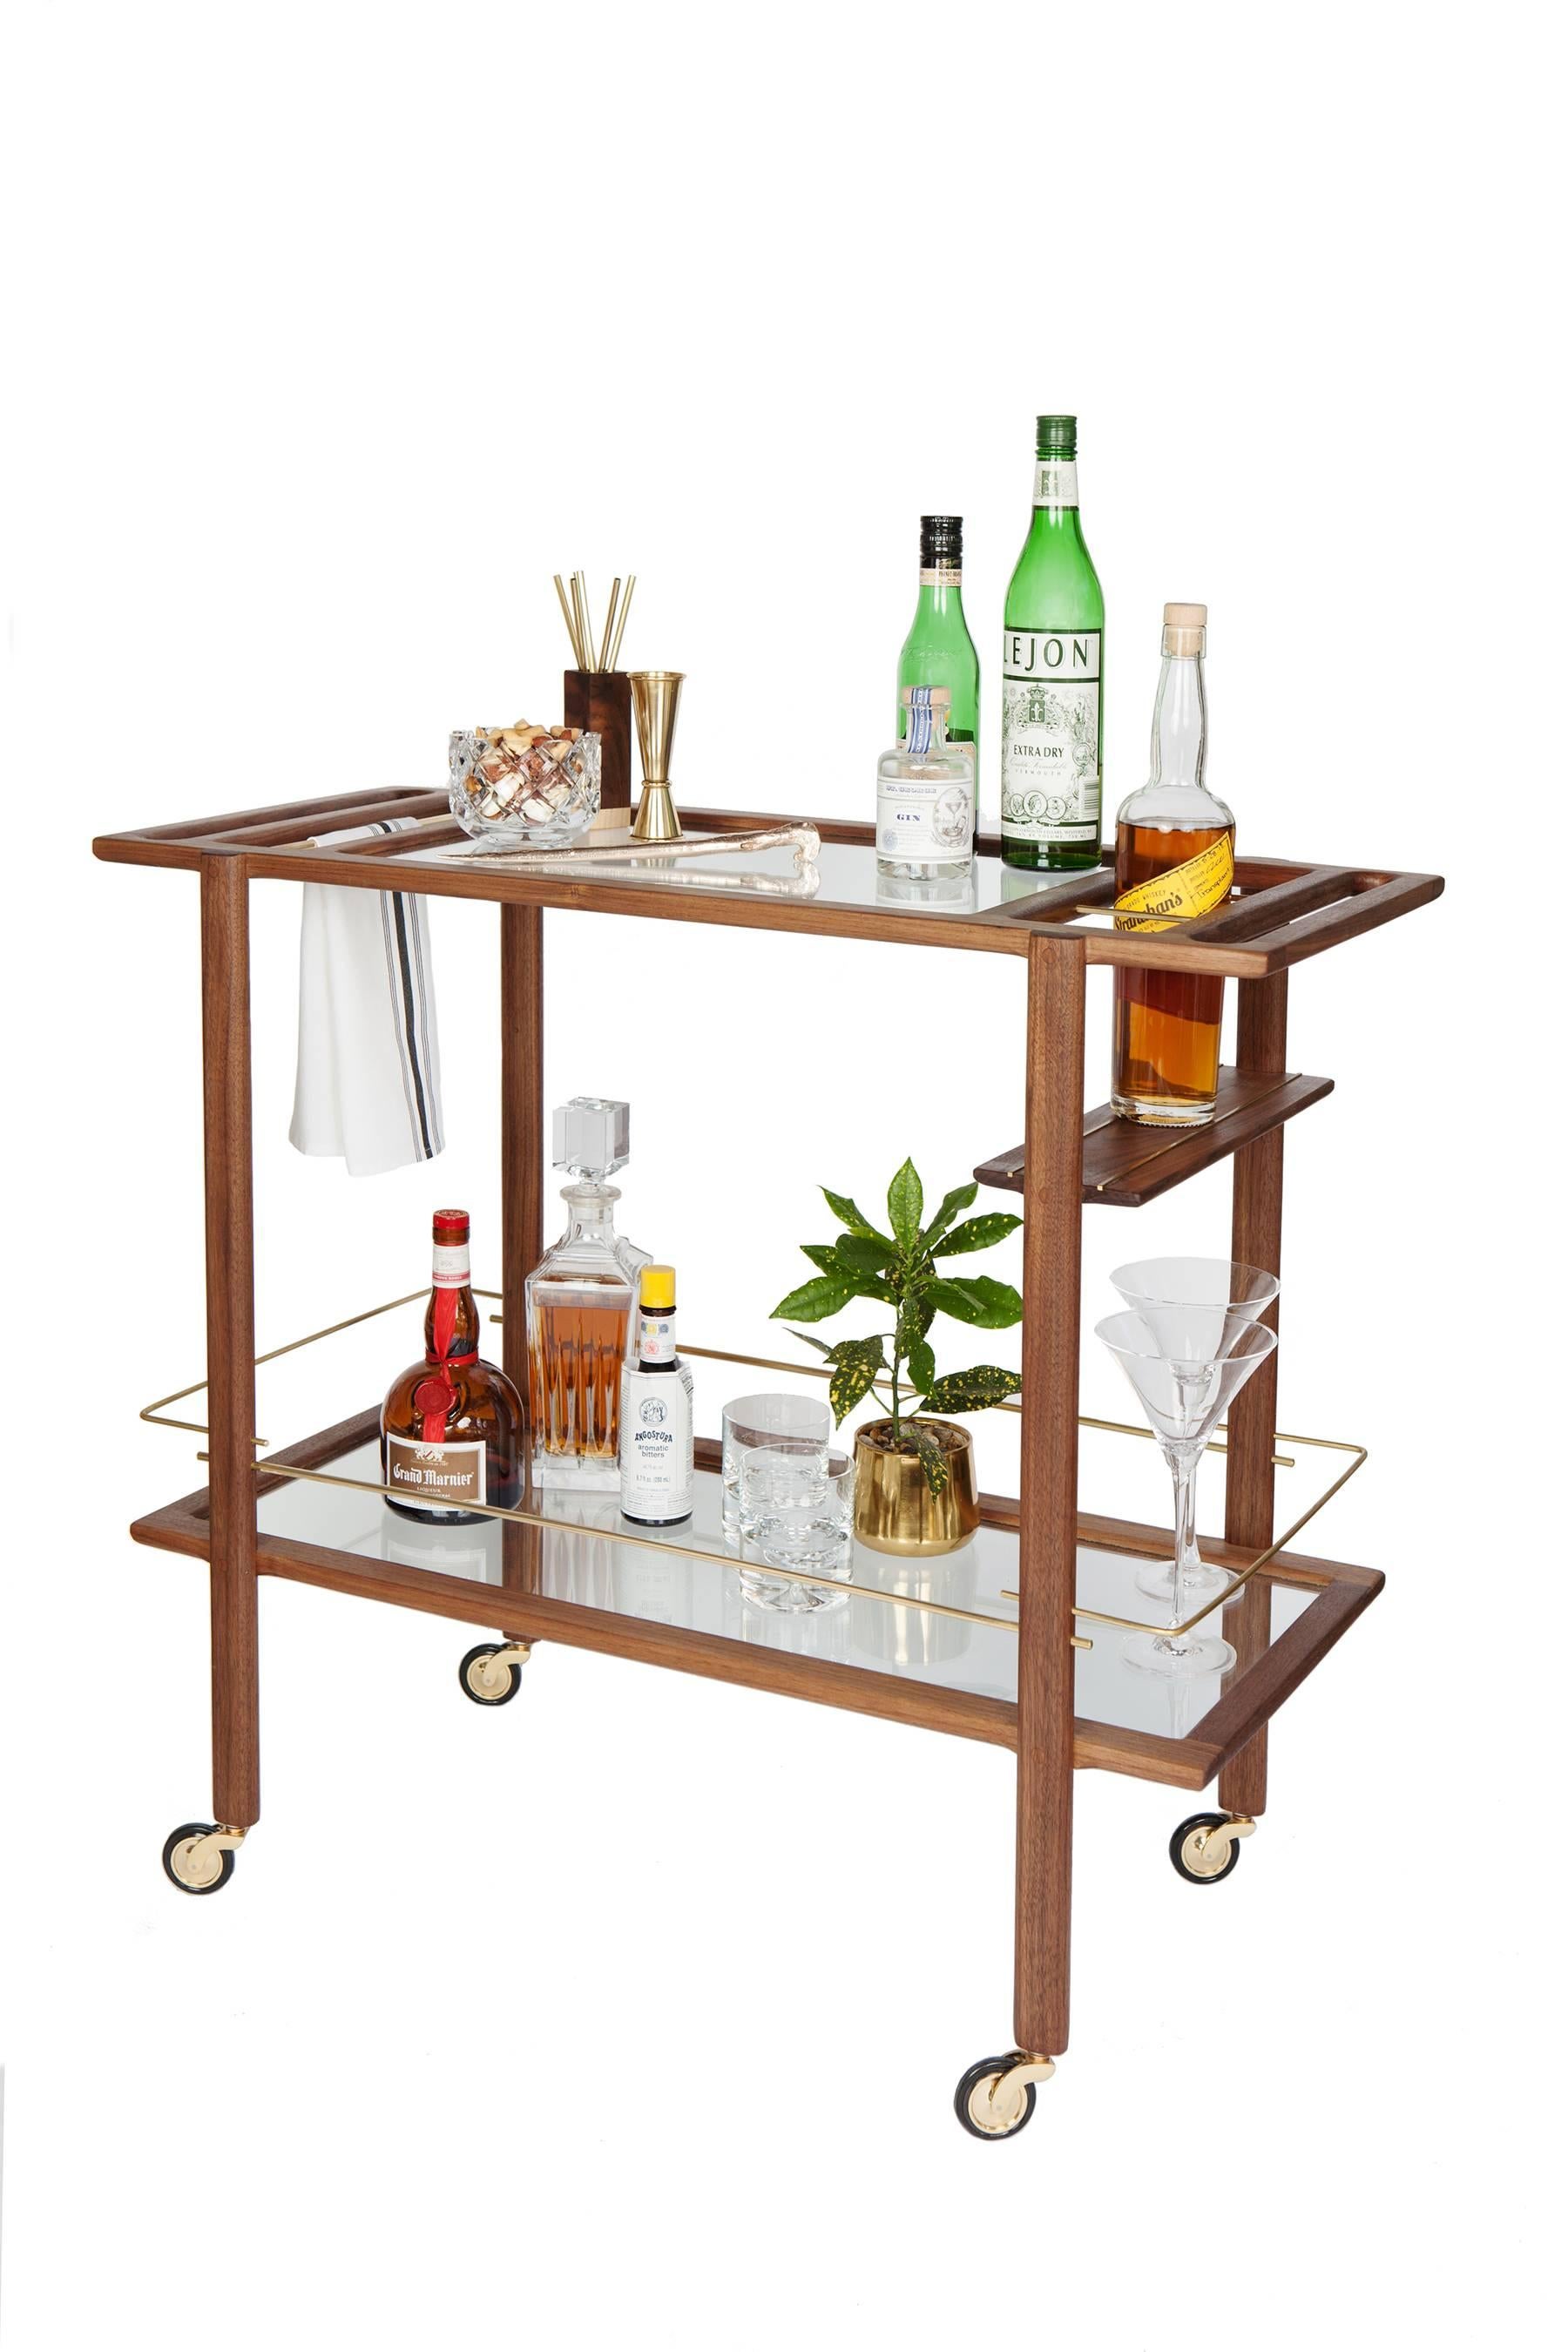 Solid wood constructed barcart with hand-cut joinery, tempered glass panels, and fine metal accents. Handmade in Los Angeles, California.

Shown in walnut.
Please inquire for custom wood, metal and glass options.

Wood type is available in